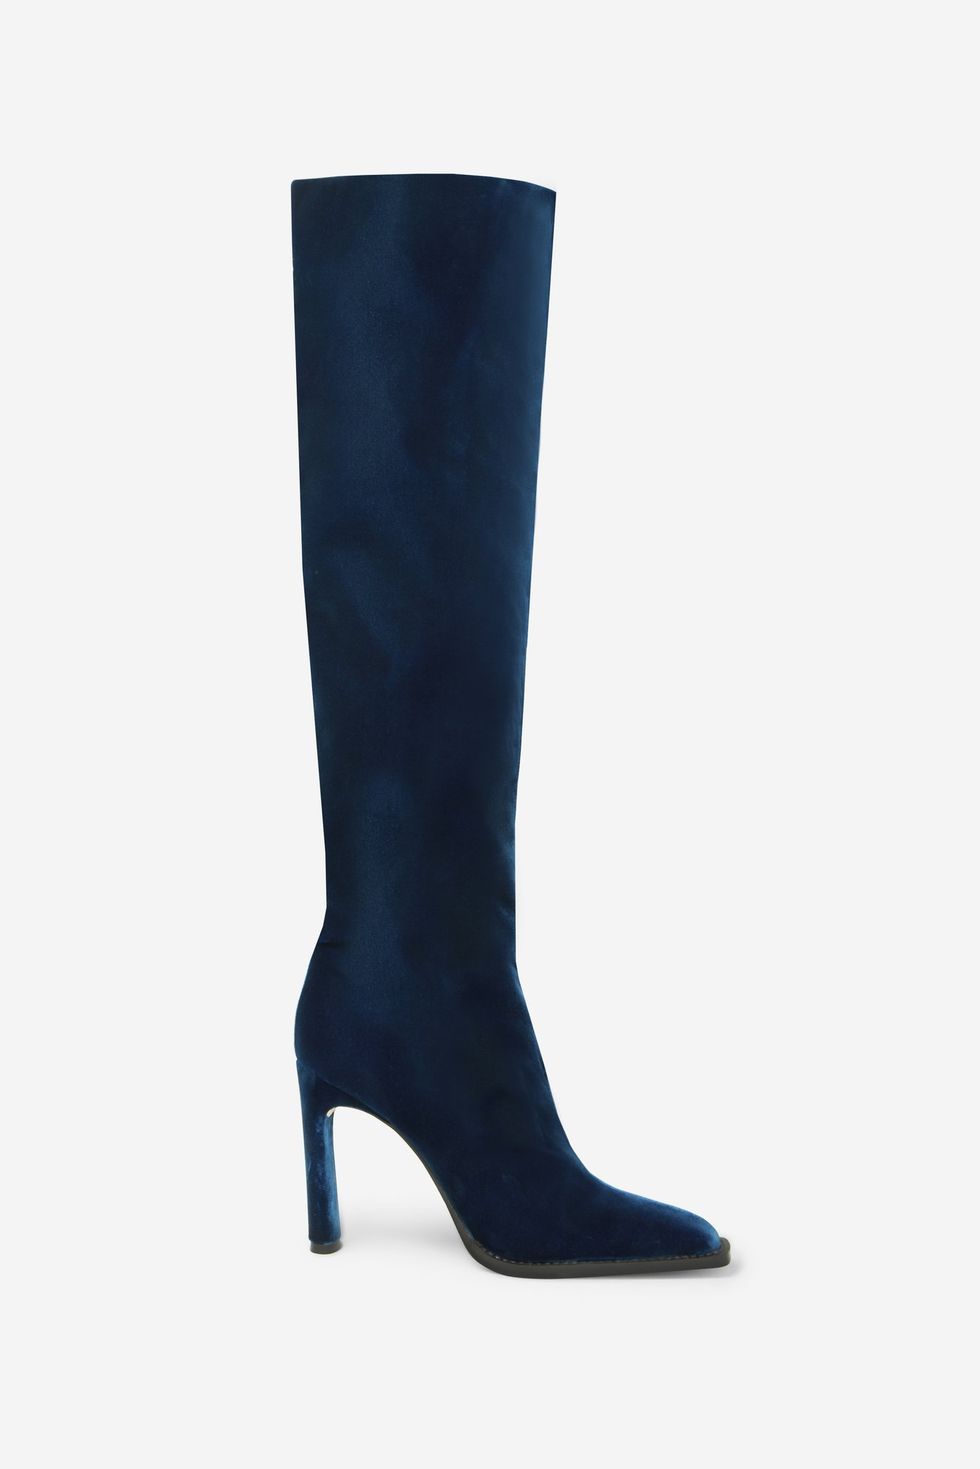 Best Over-the-Knee Boots - Sexy Thigh High Boots For Fall 2021